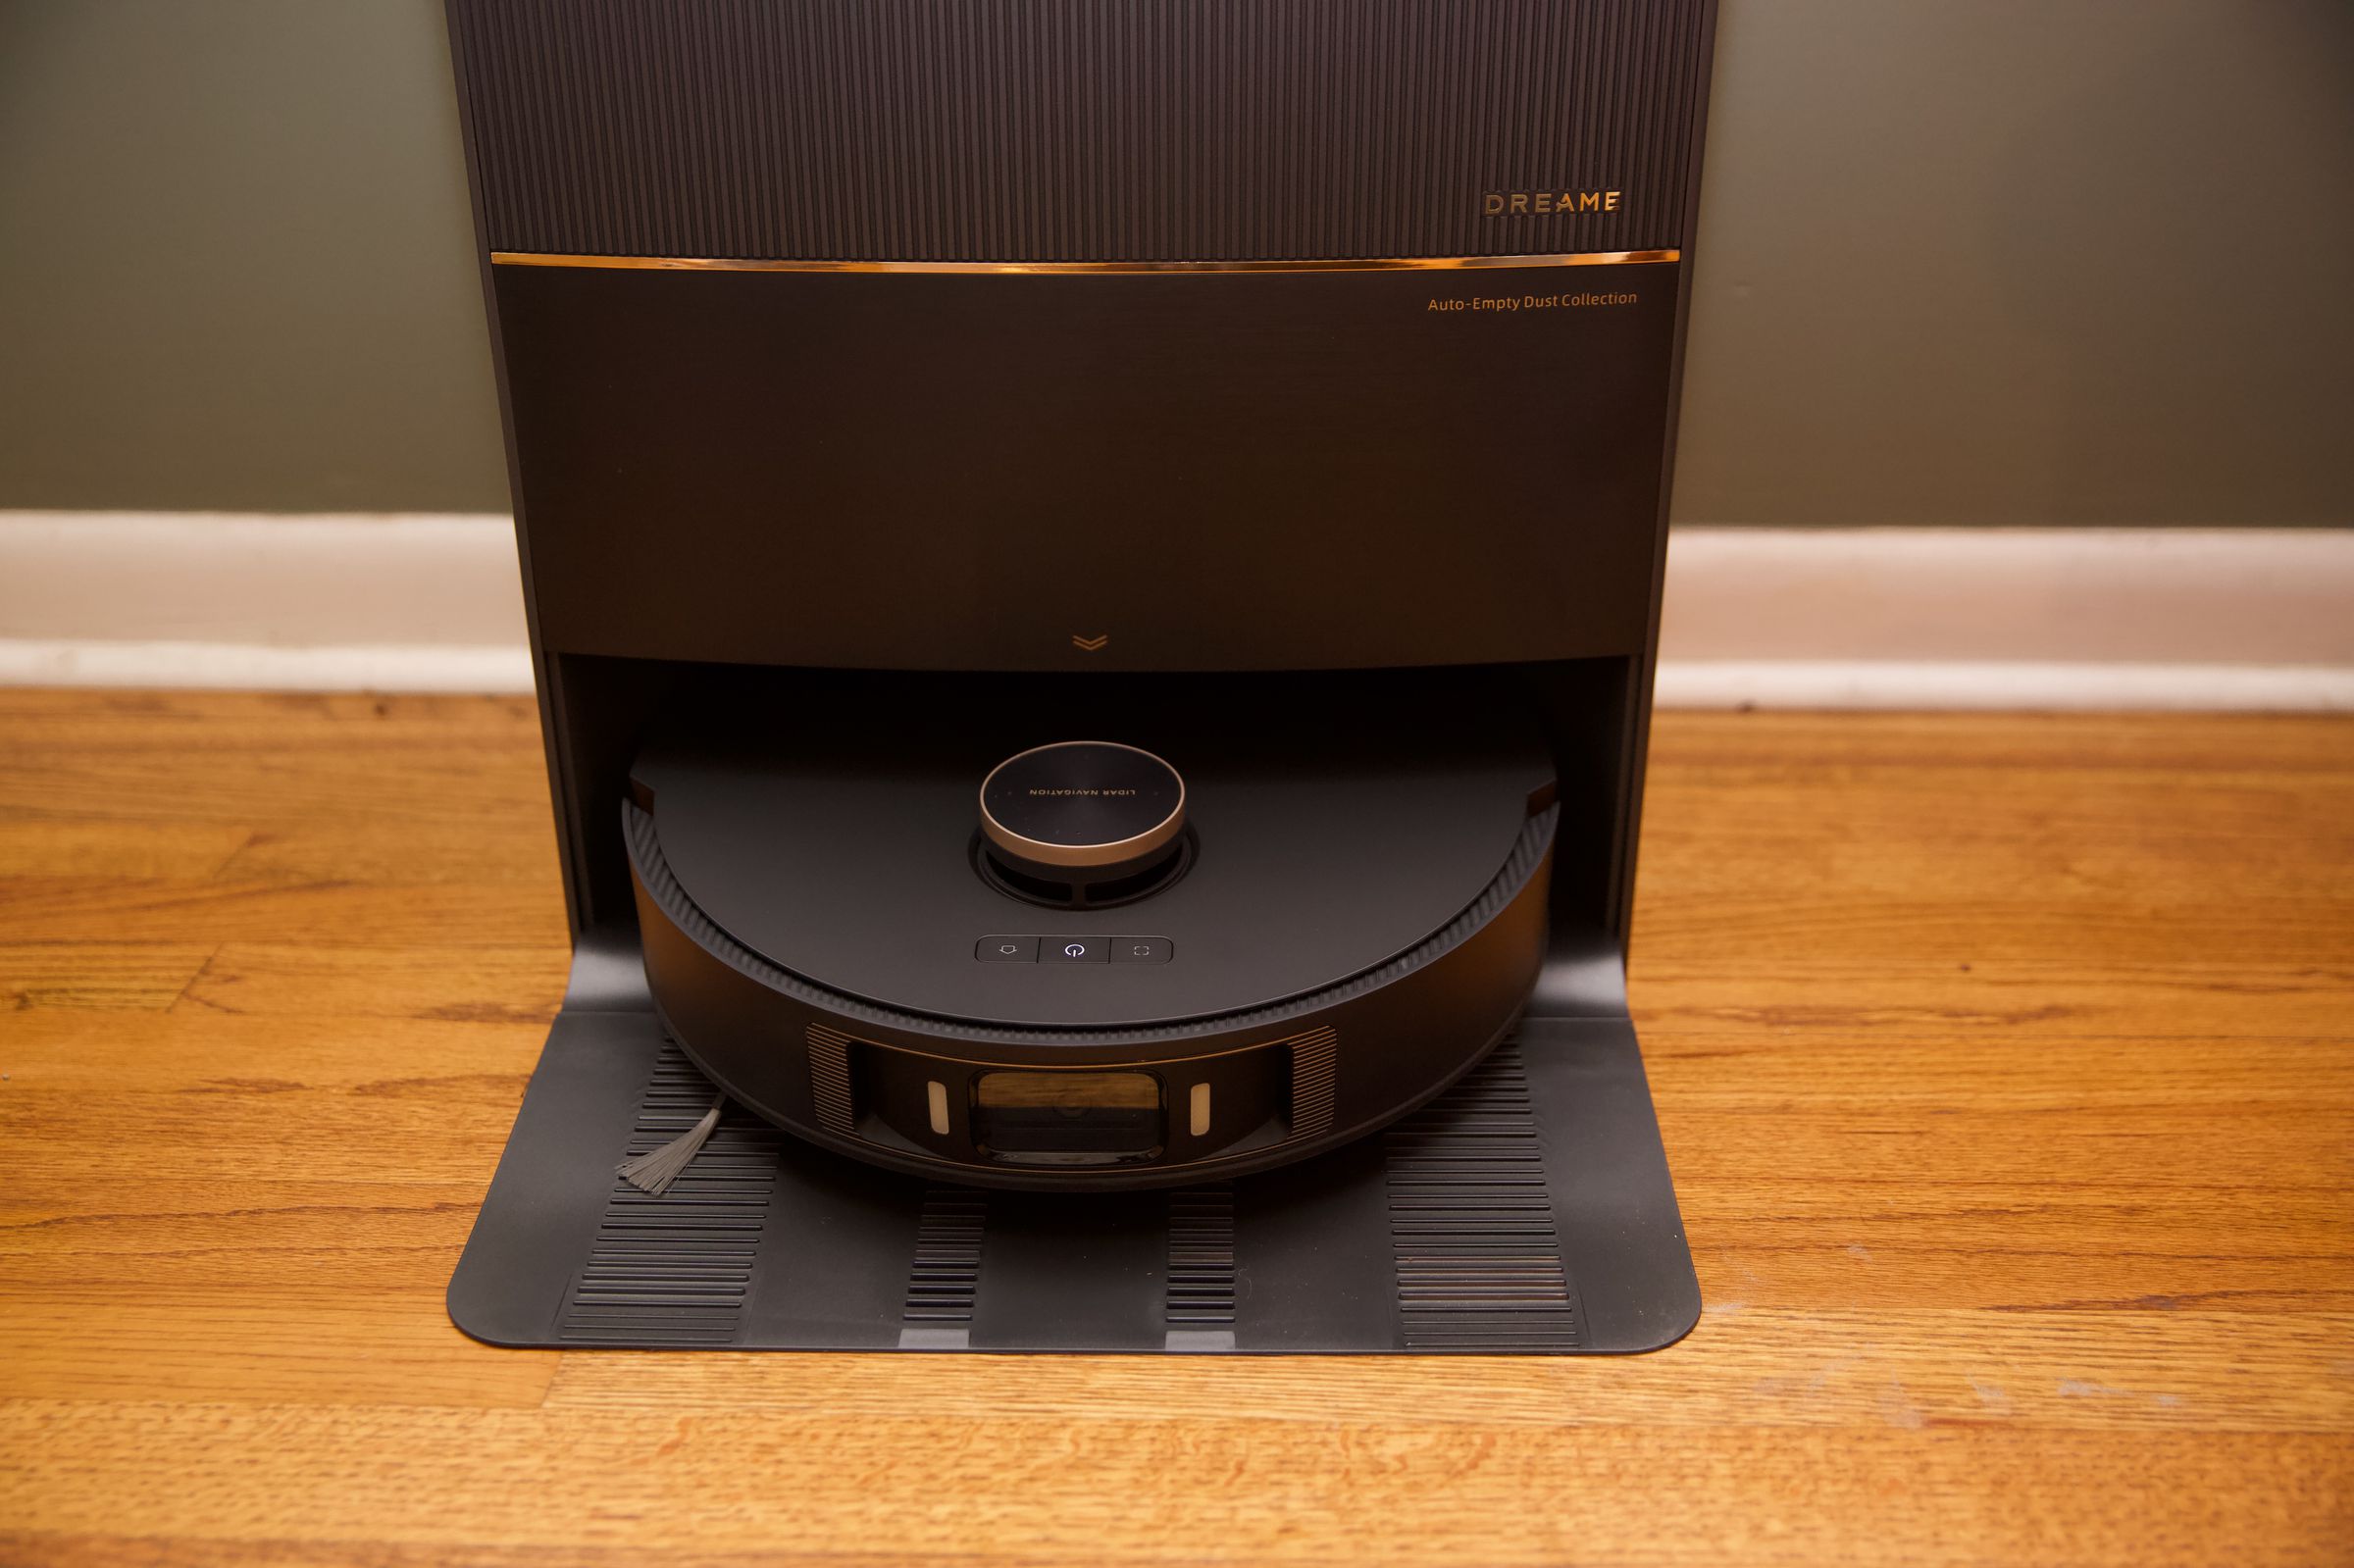 The DreameBot L20 Ultra robot vacuum and mop sitting docked in its auto-emptying station.